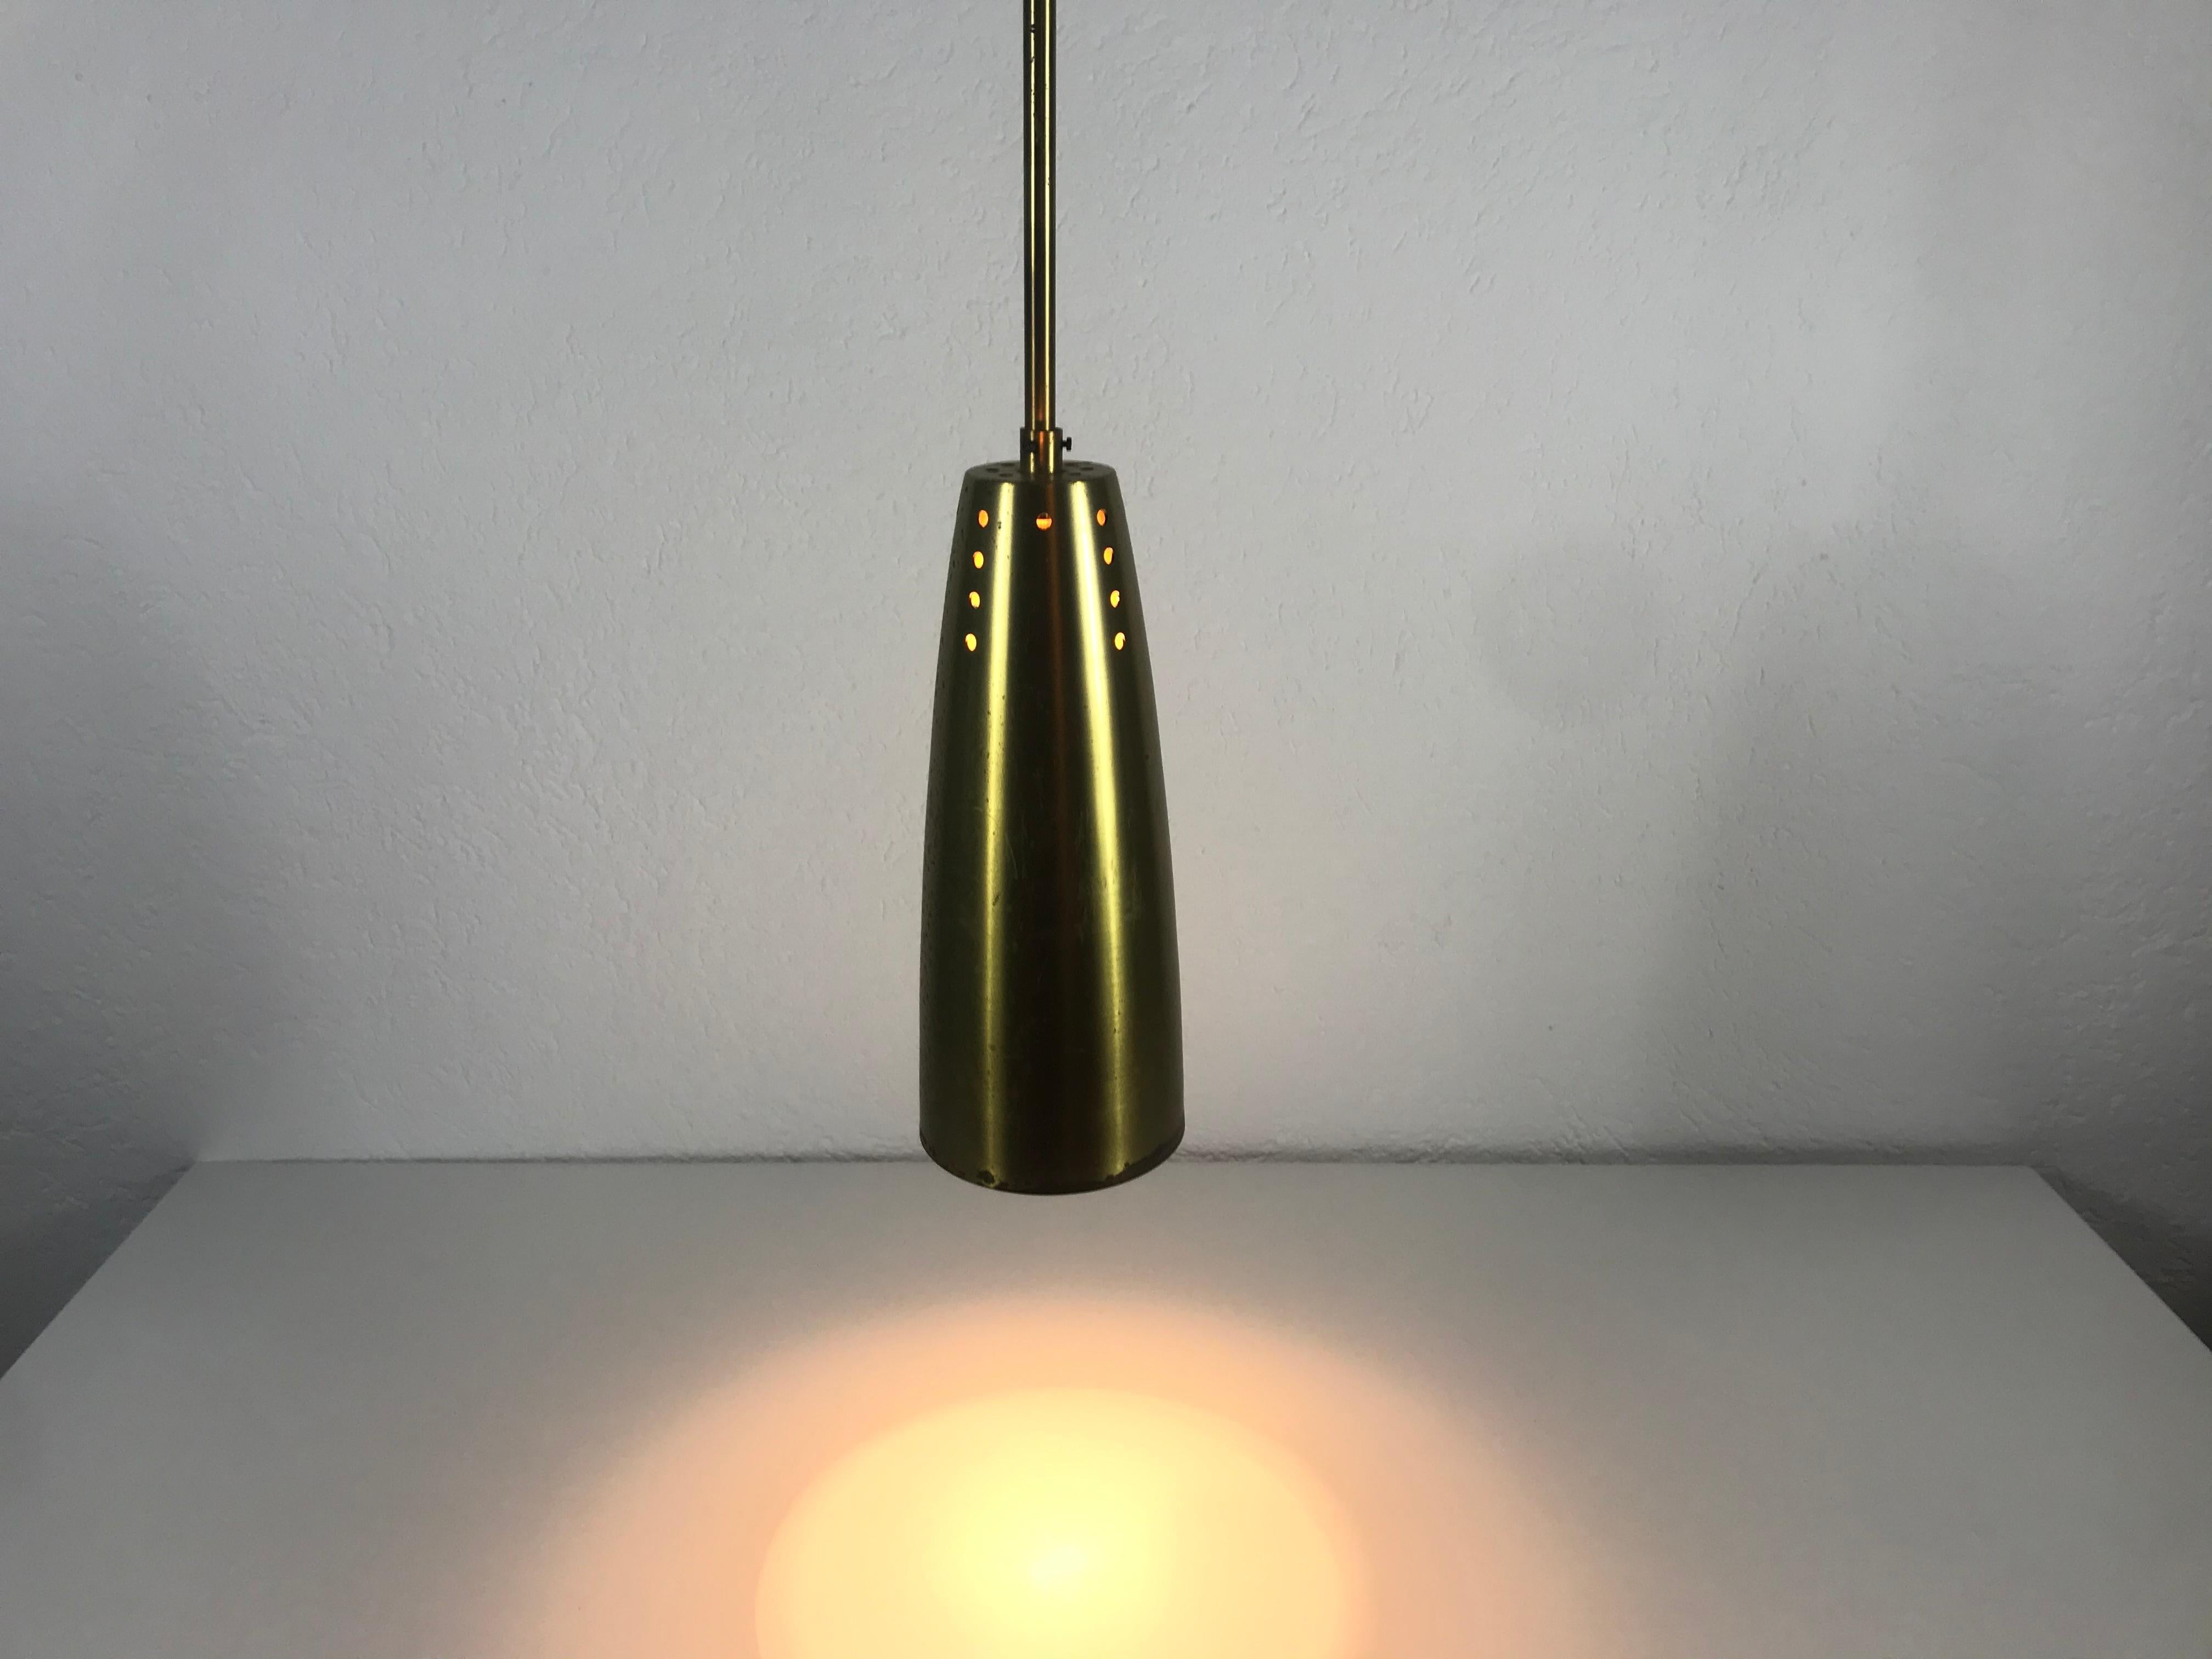 Pair of Full Brass Mid-Century Modern Pendant Lamps, 1950s, Germany In Good Condition For Sale In Hagenbach, DE